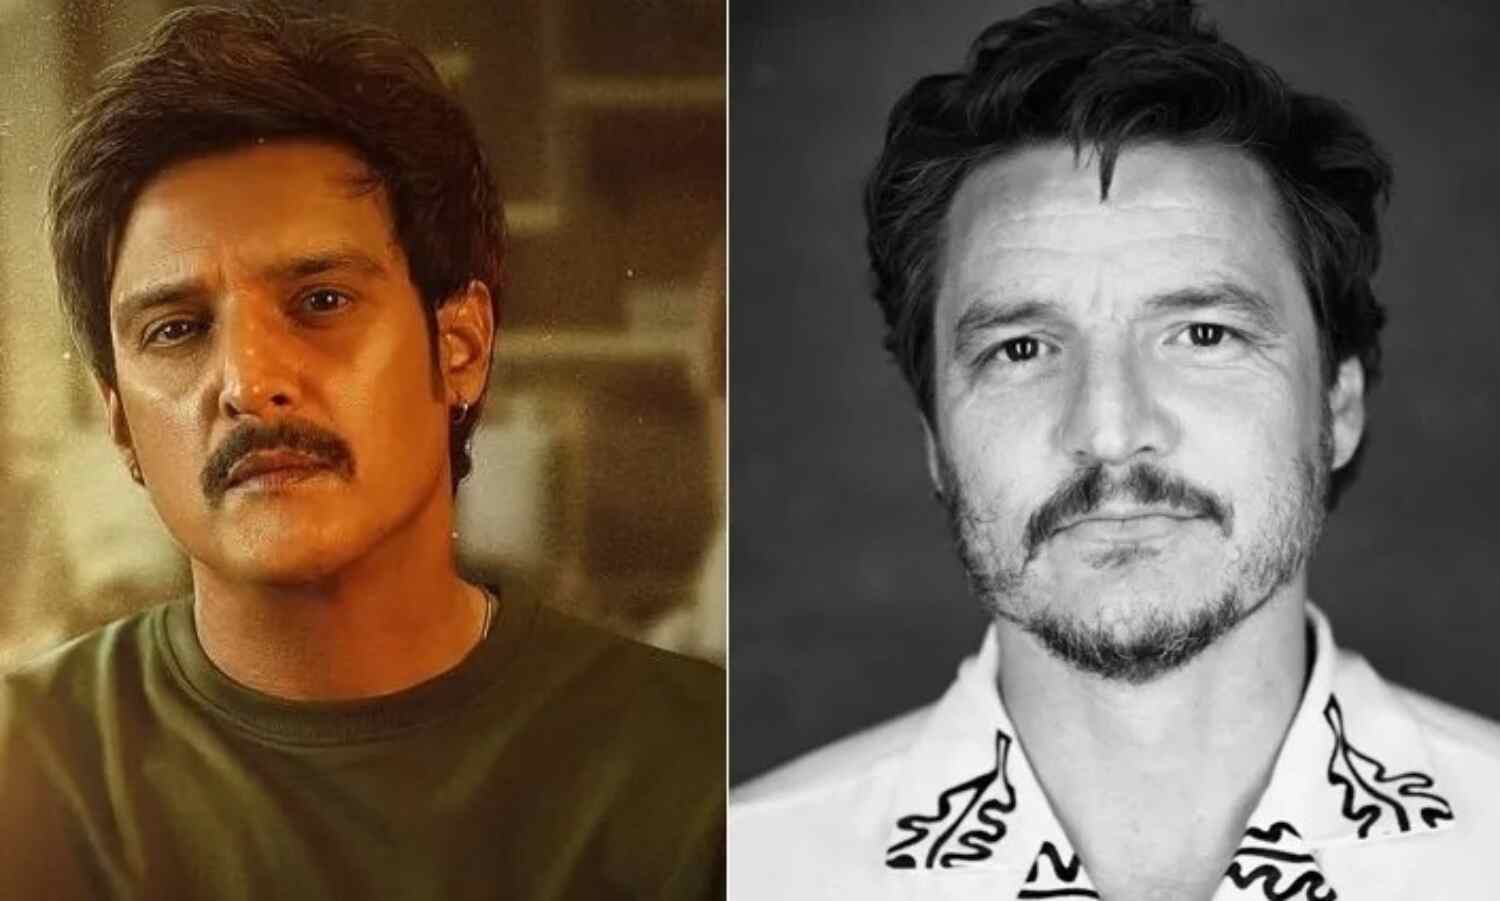 Jimmy Sheirgill told he looks like Hollywood star Pedro Pascal